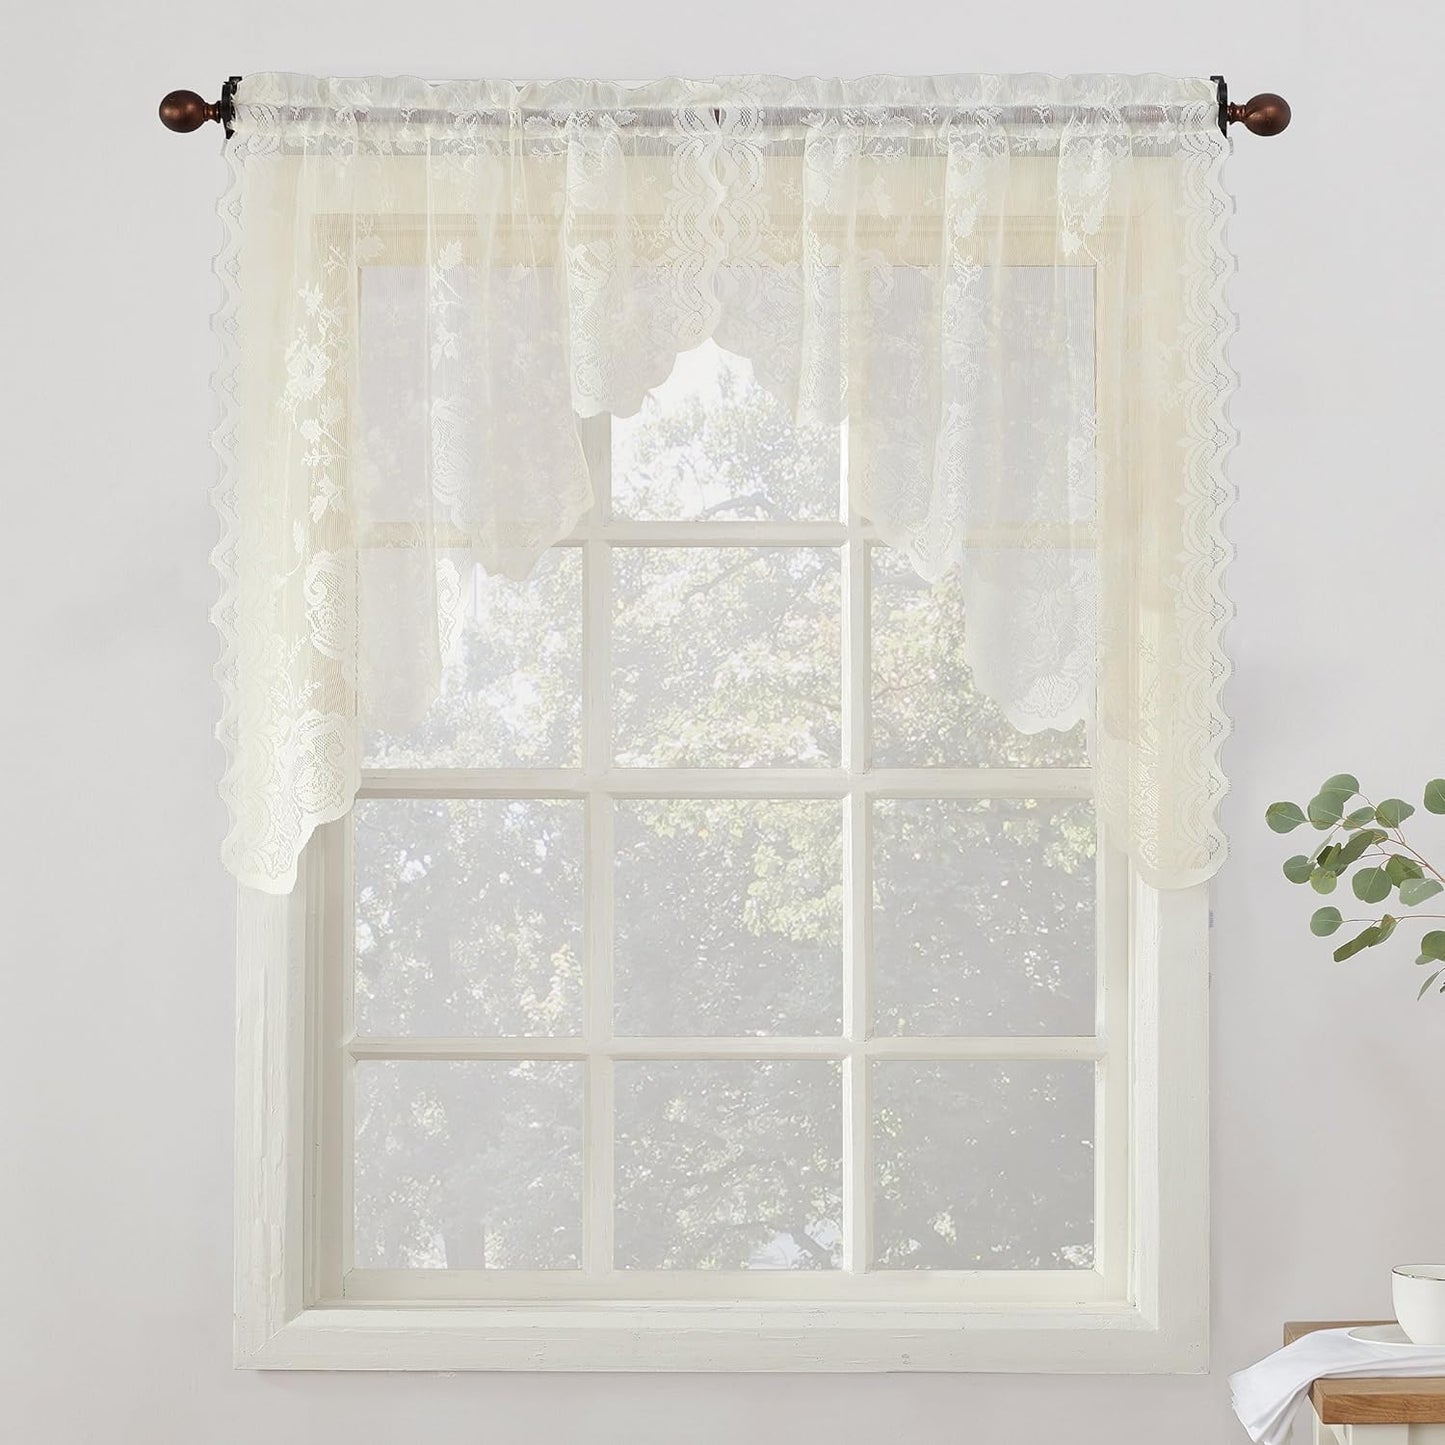 No. 918 Alison Floral Lace Sheer Rod Pocket Kitchen Curtain Valance, 58" X 14", White  No. 918 Ivory Kitchen Swag Pair 58" X 38"